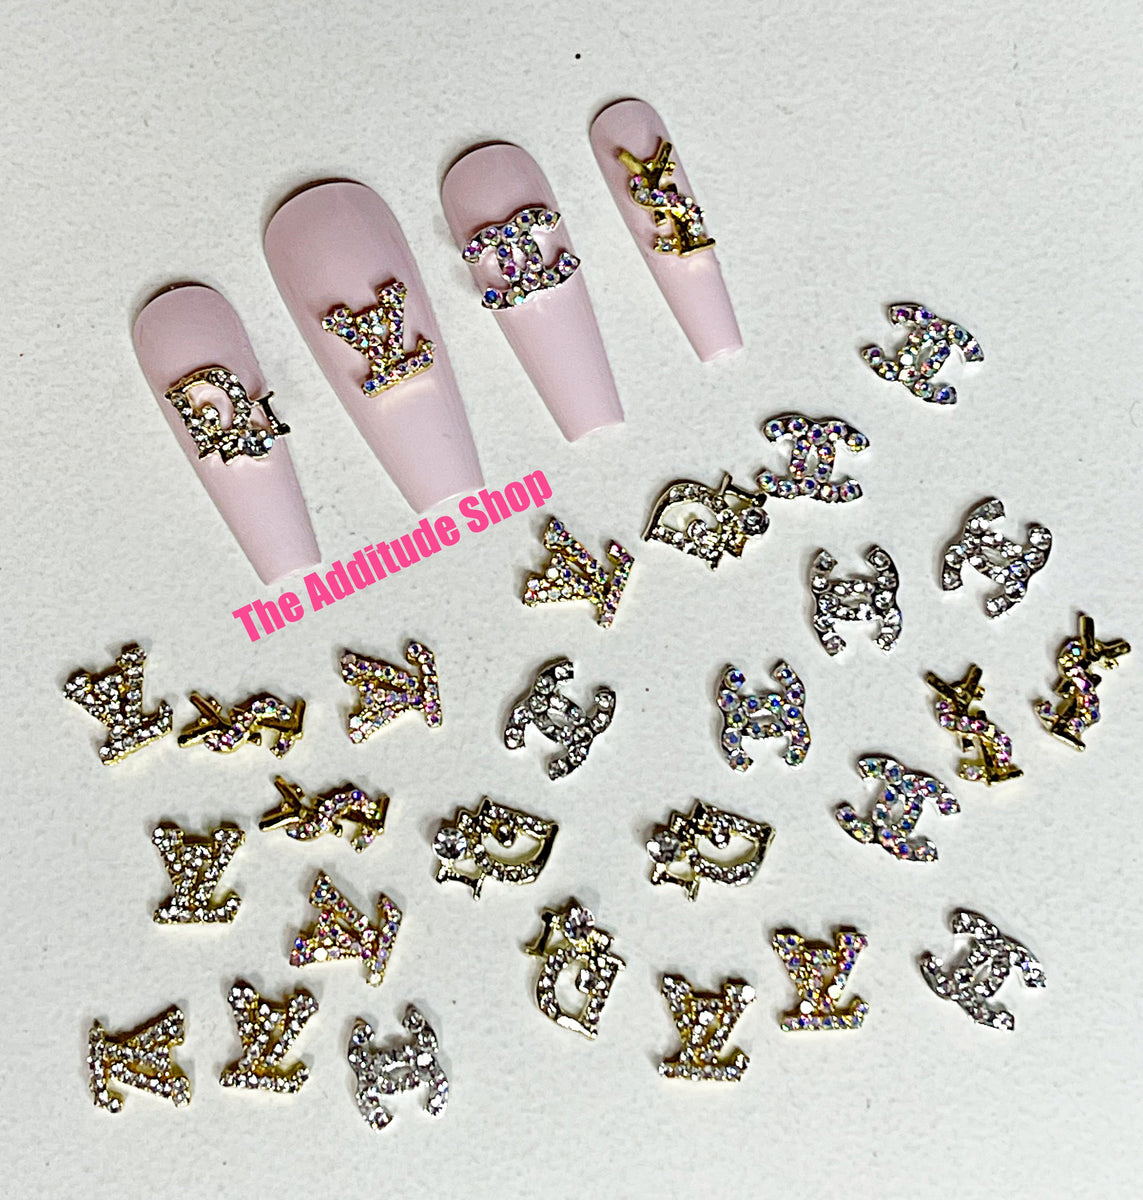 Fancy 5 Designs Nail Charms (20 Pieces) – The Additude Shop